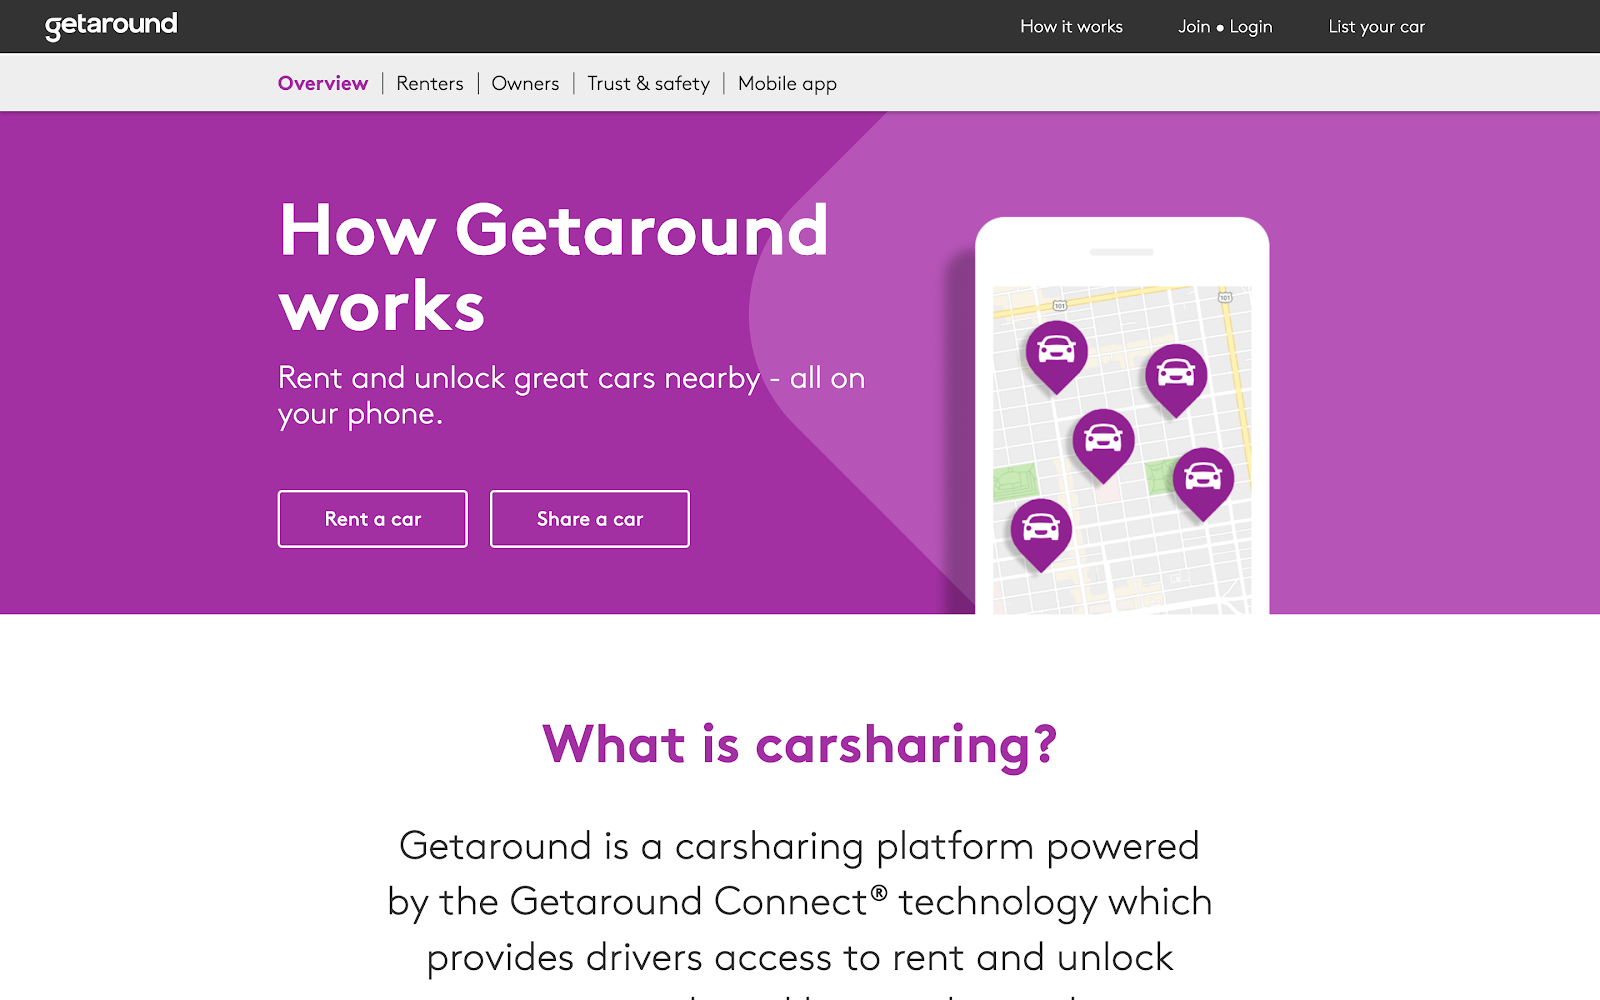 With Get Around, you can book a car around the world